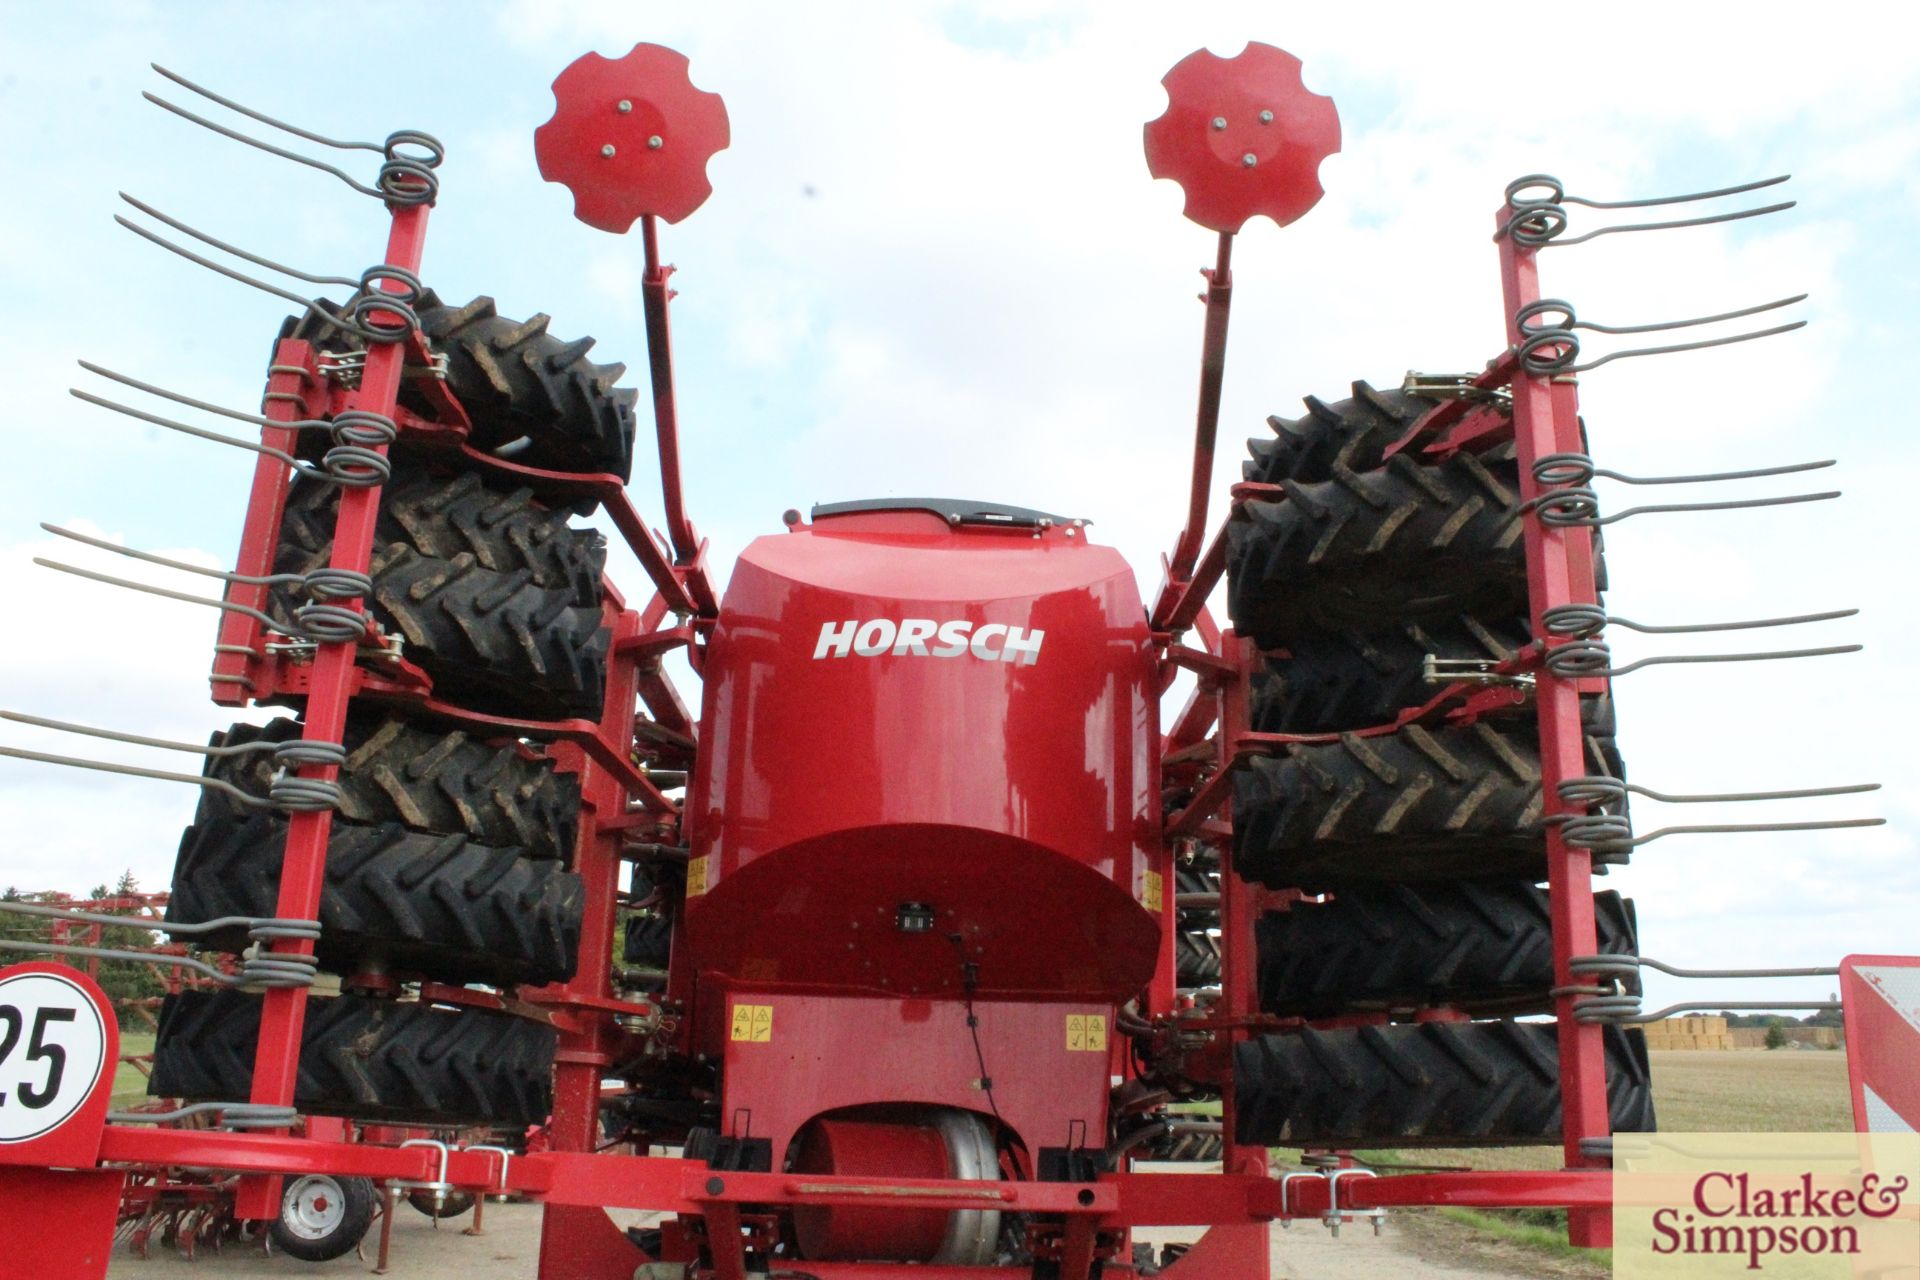 Horsch Sprinter 6ST 6m hydraulic folding trailed drill. 2019. Serial number 31261353. Grain and - Image 28 of 58